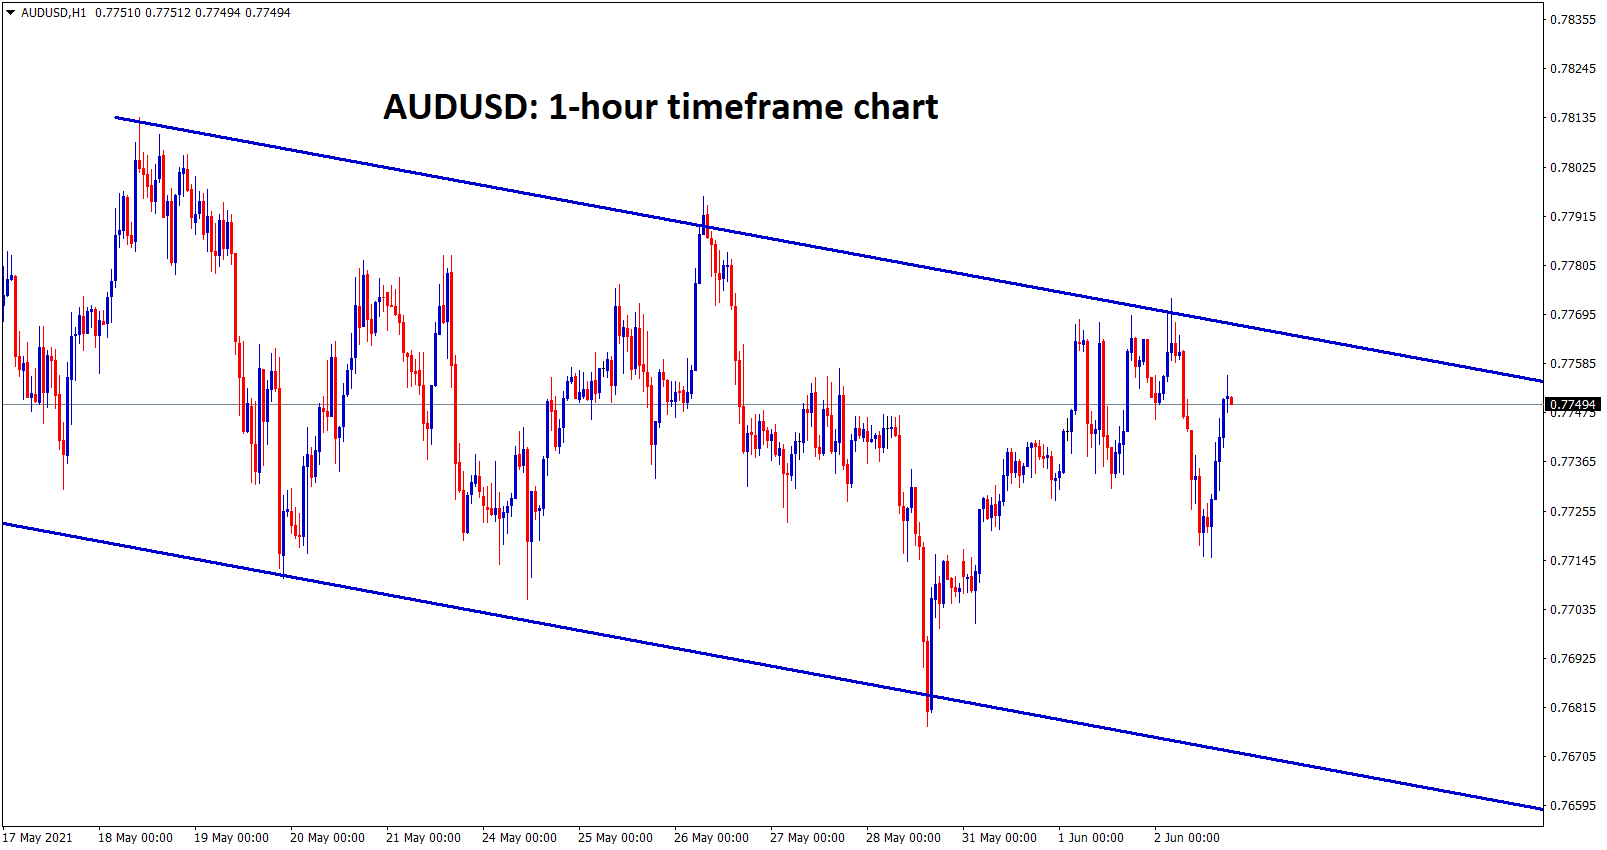 AUDUSD is moving in a descending channel forming lower highs and lower lows